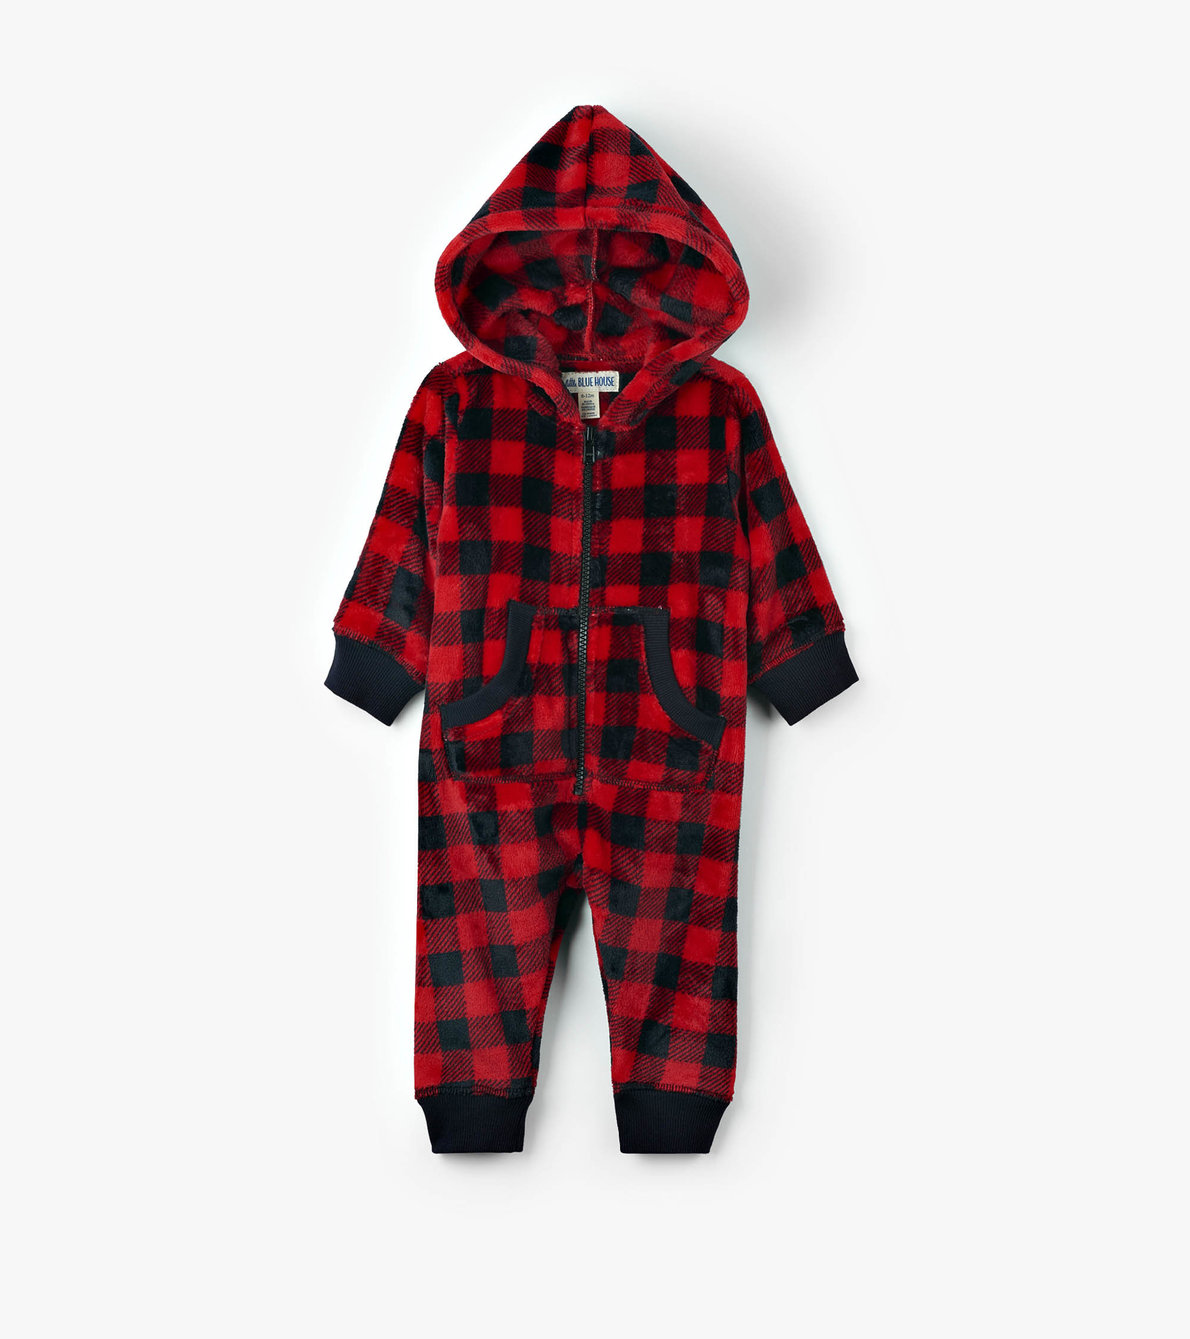 View larger image of Baby Buffalo Plaid Hooded Fleece Jumpsuit